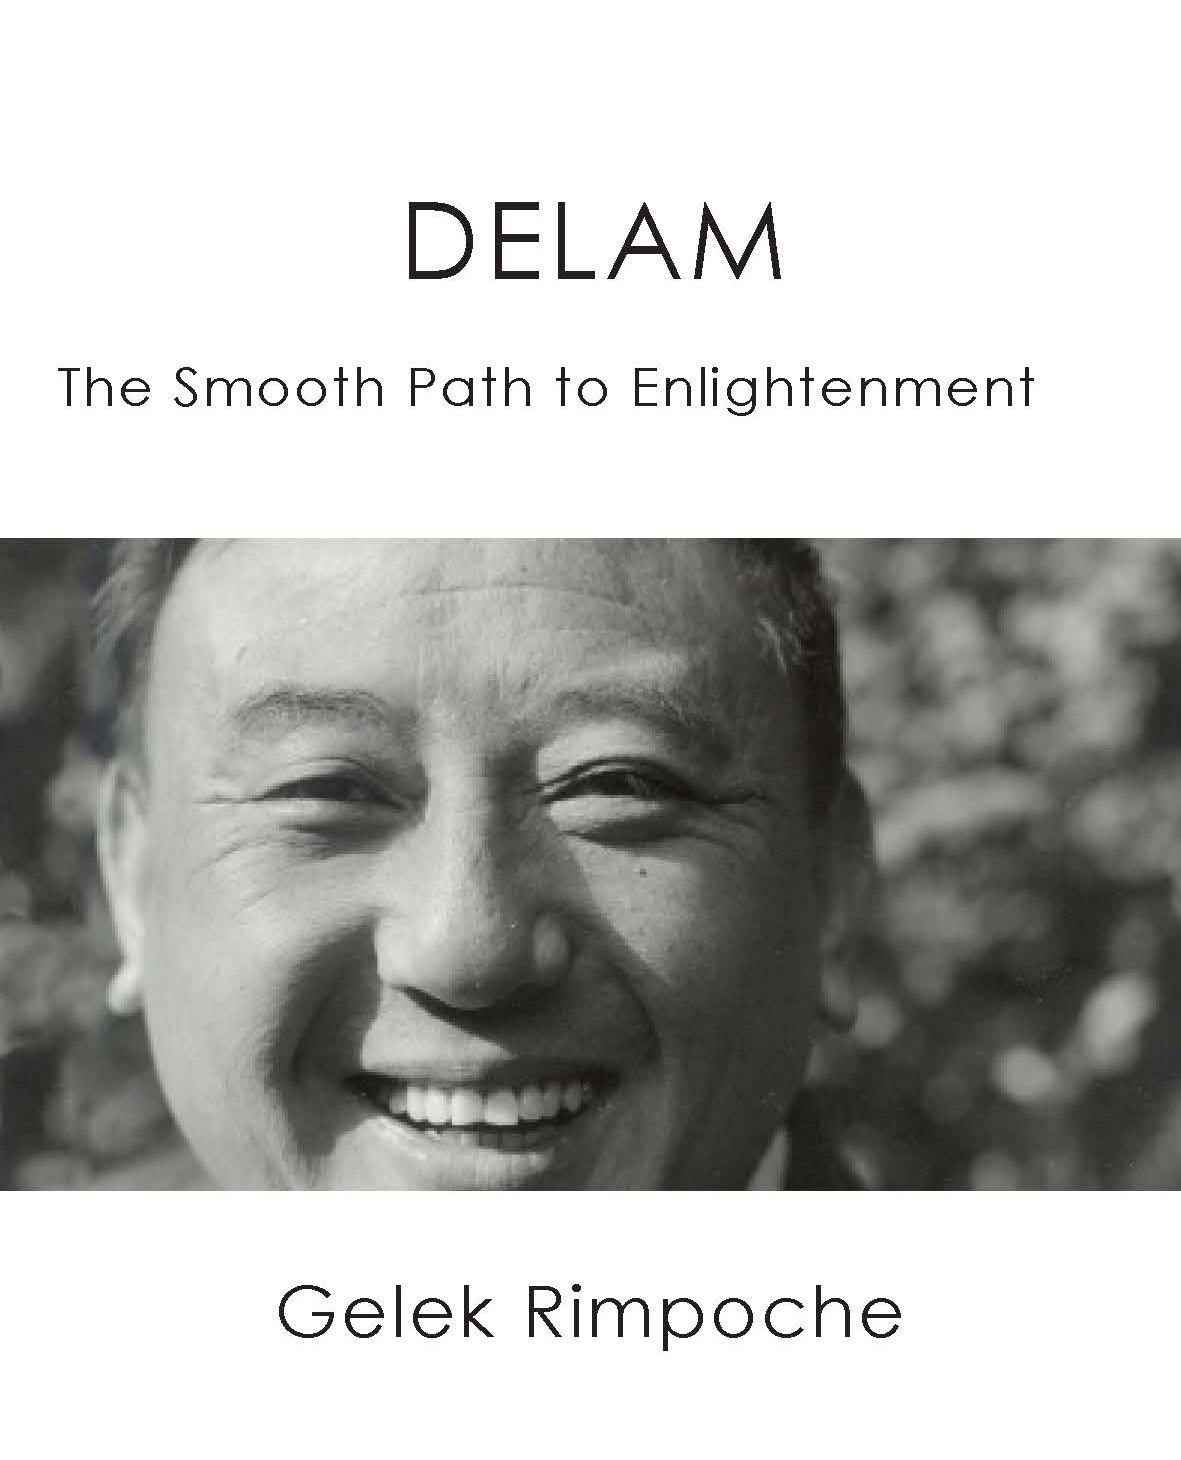 Delam – The Smooth Path to Enlightenment